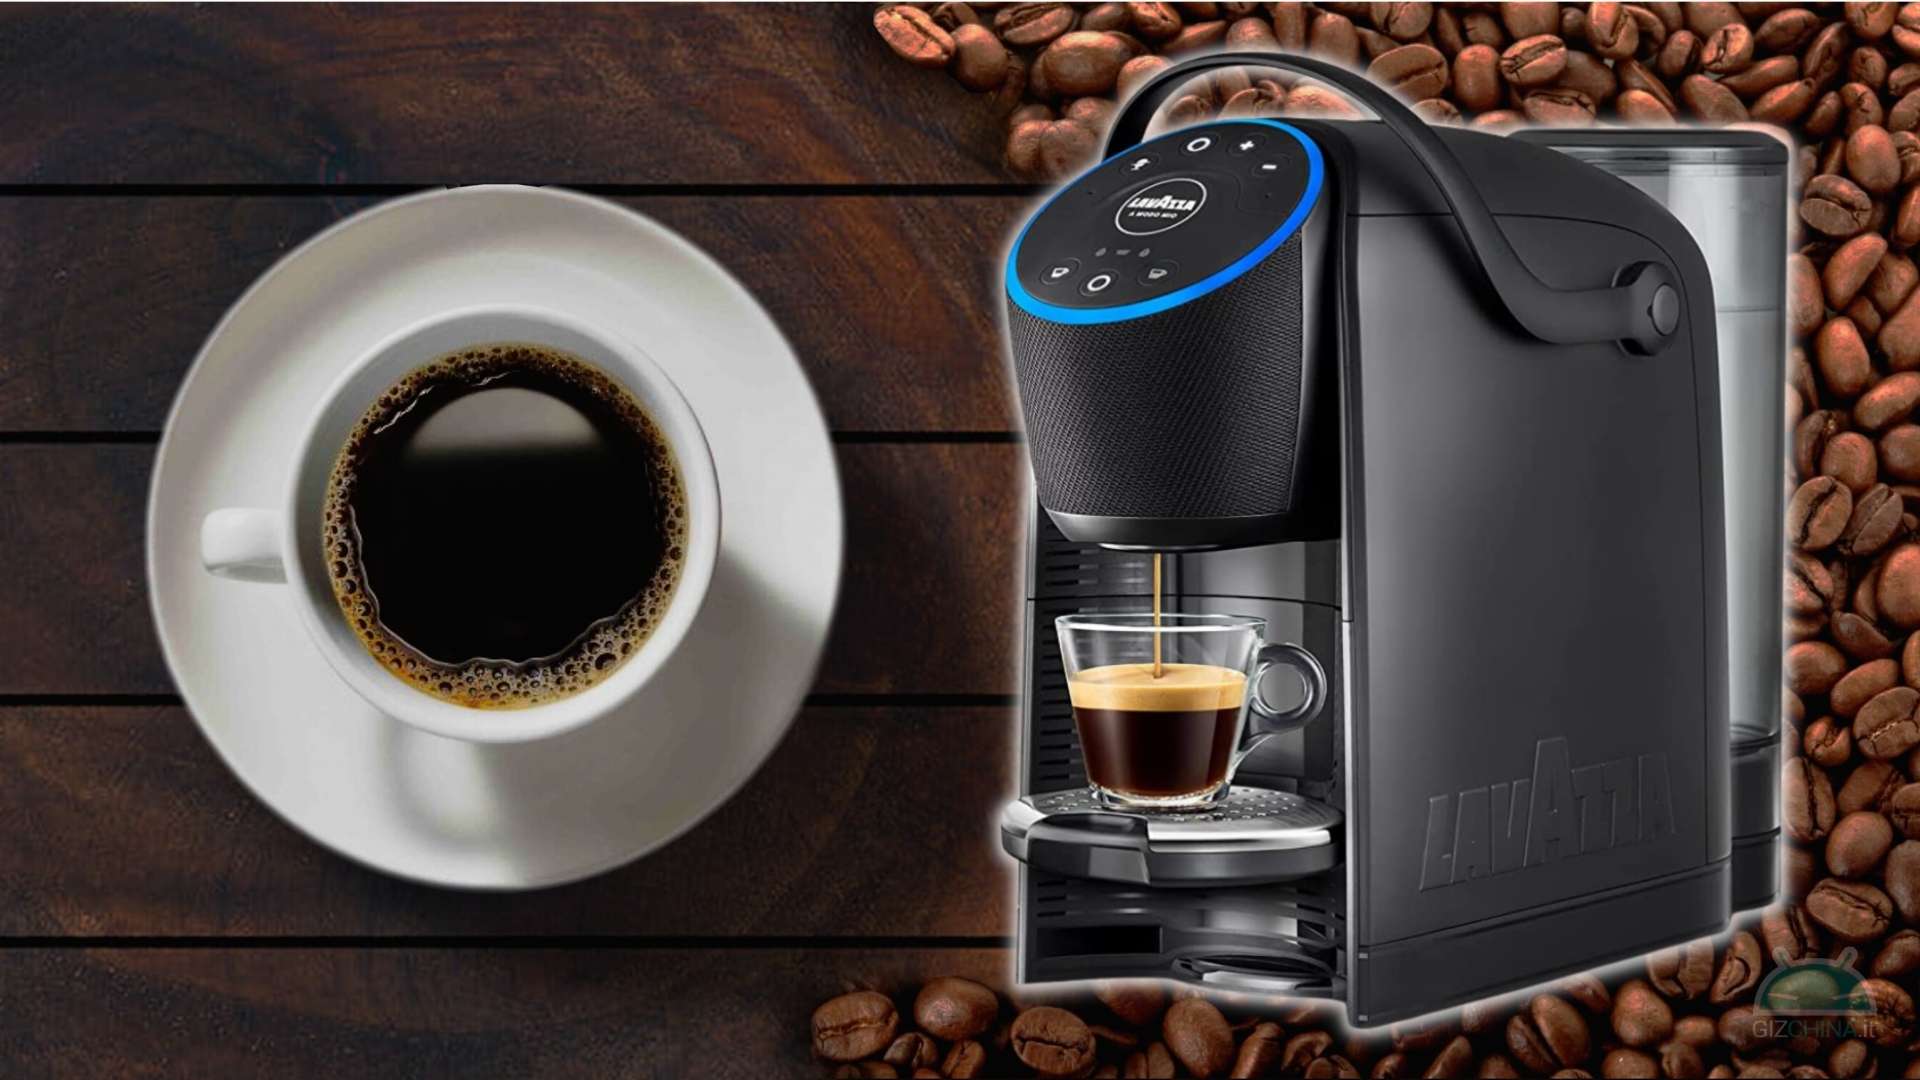 The Lavazza coffee machine with Alexa is close to 40% discount